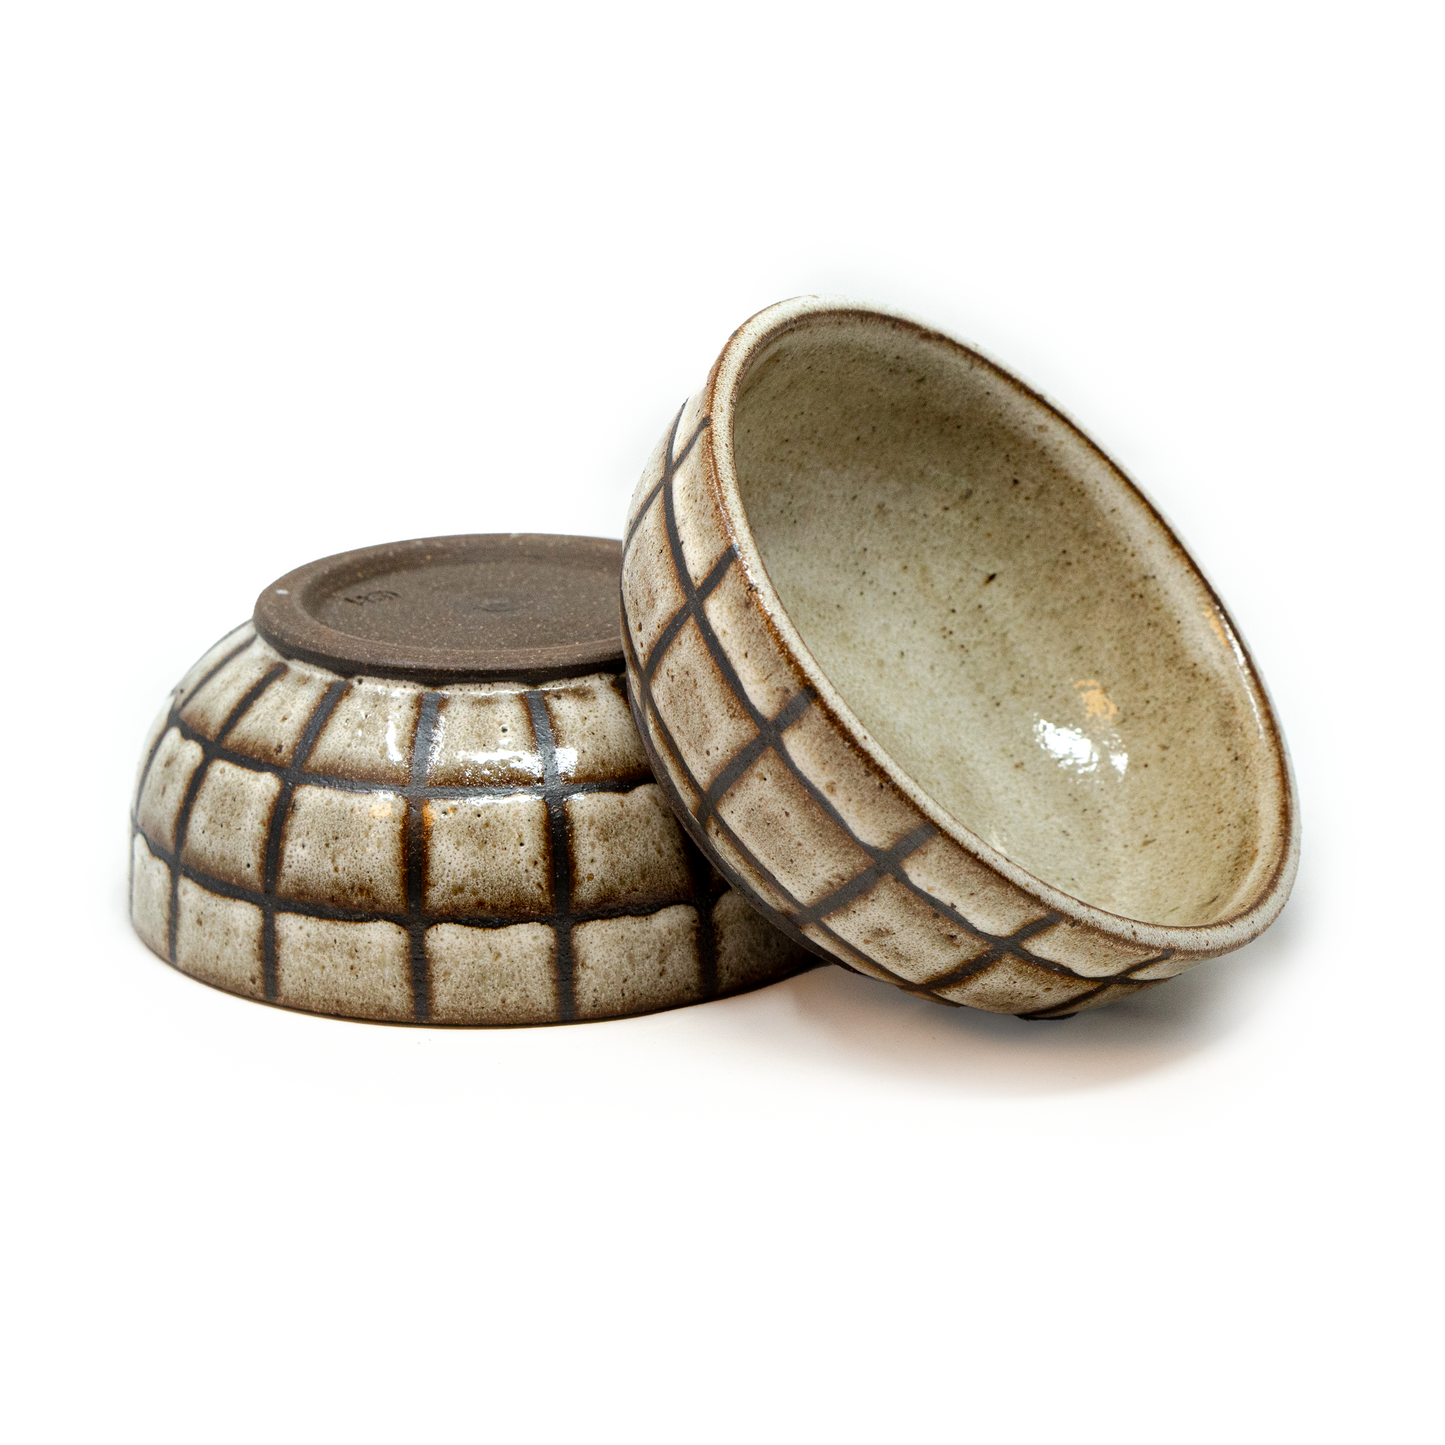 2 brown checkered ceramic bowls by a hill studio